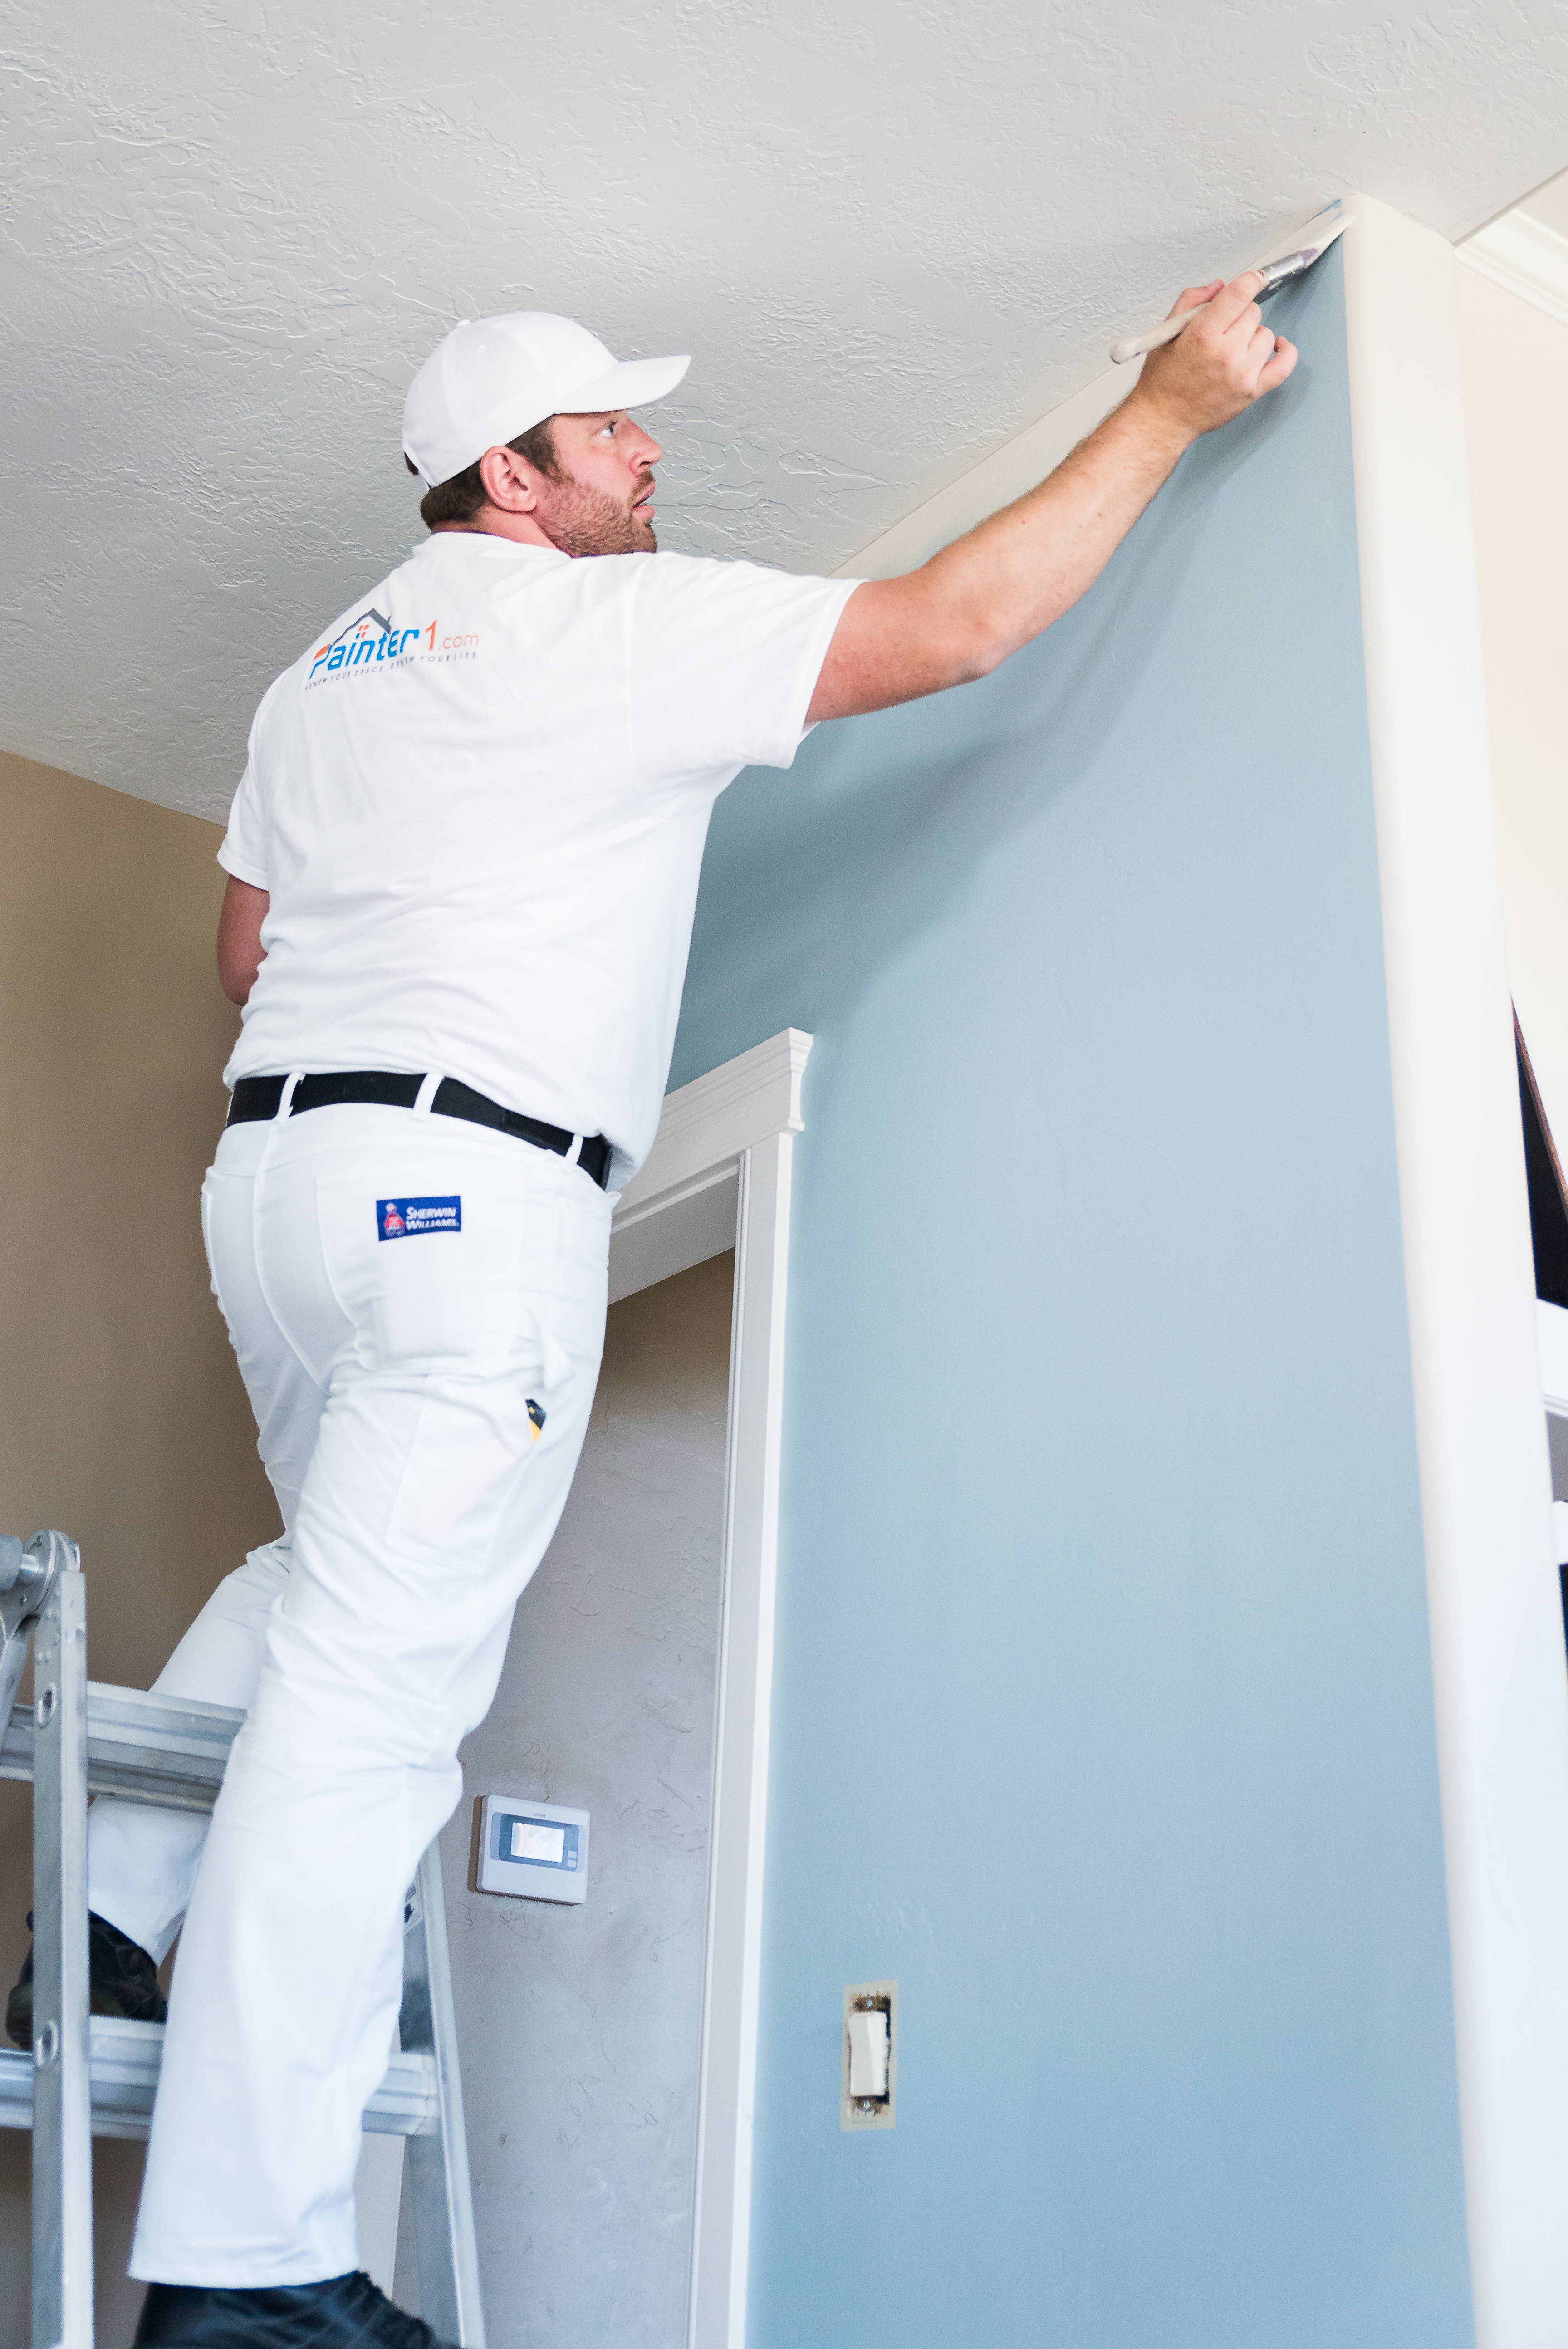 If you are looking to own a top painting franchise, Painter1 may be for you.